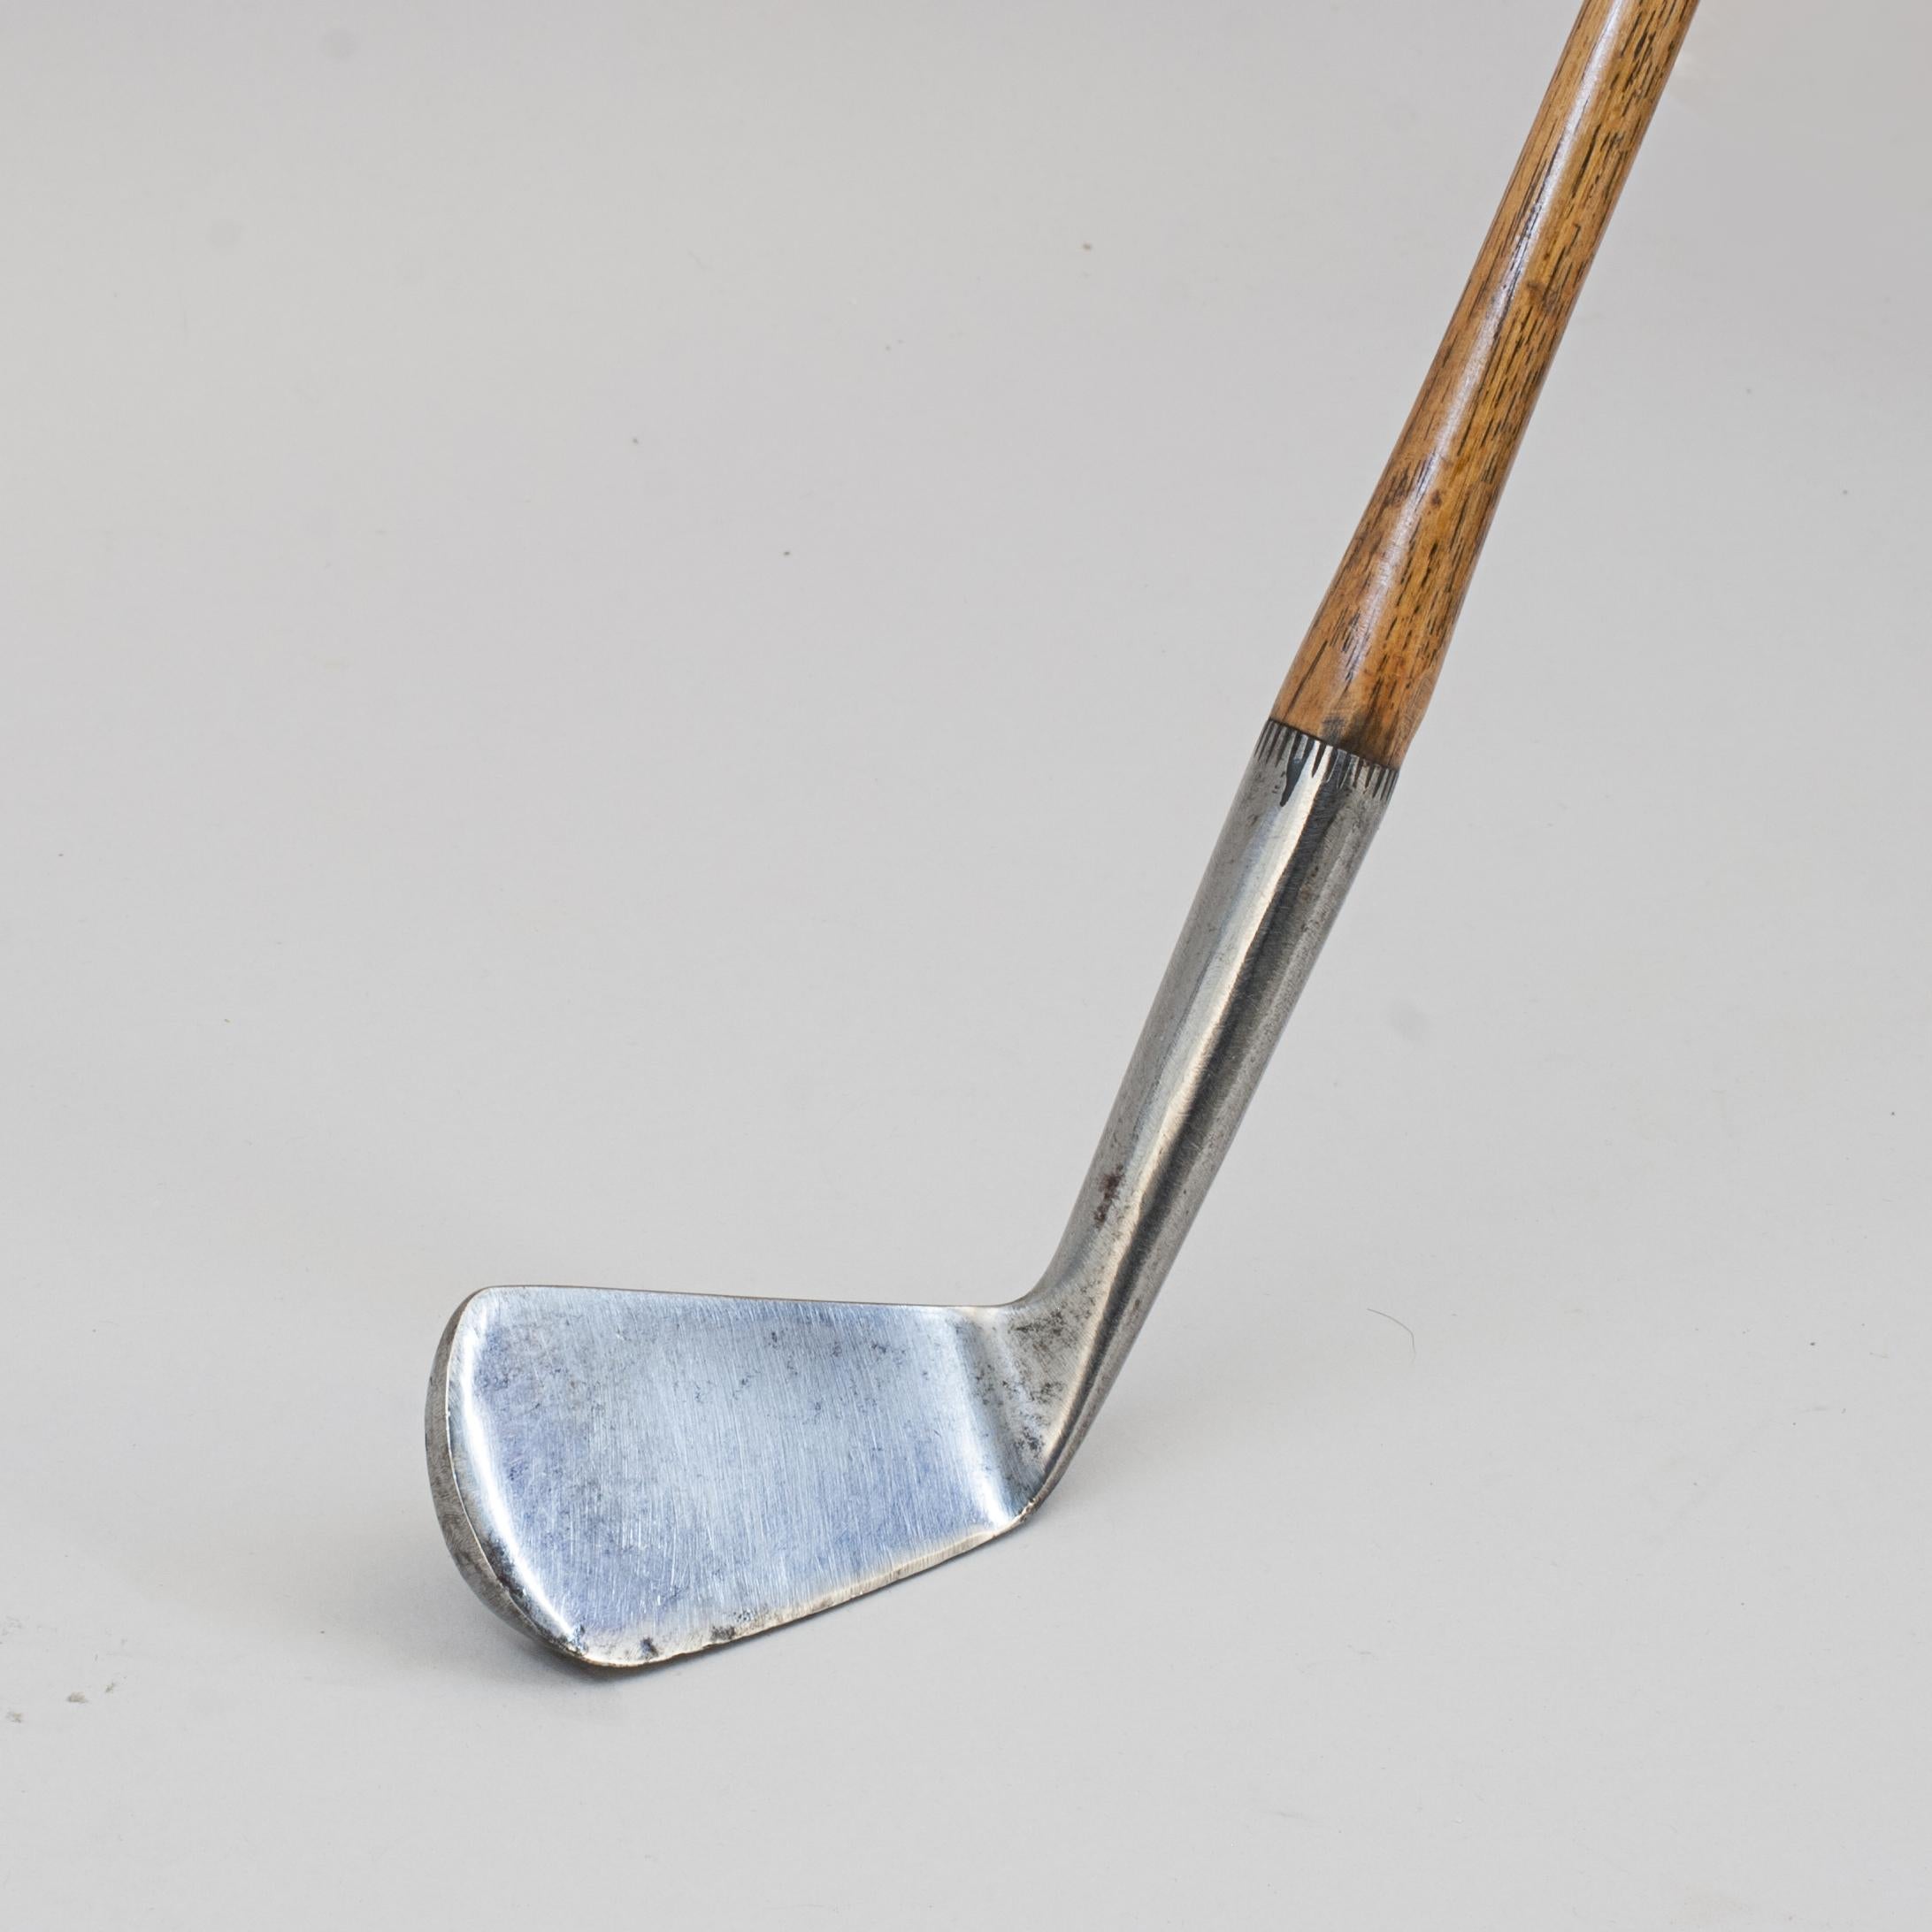 Forgan & Son Golf Club, Smooth Face Mashie.
This early Forgan & Son hickory shafted mashie has a smooth face, hickory shaft and sheep skin grip. This is a fine example of a smooth face club which also has good strong nicking around the hosel. The